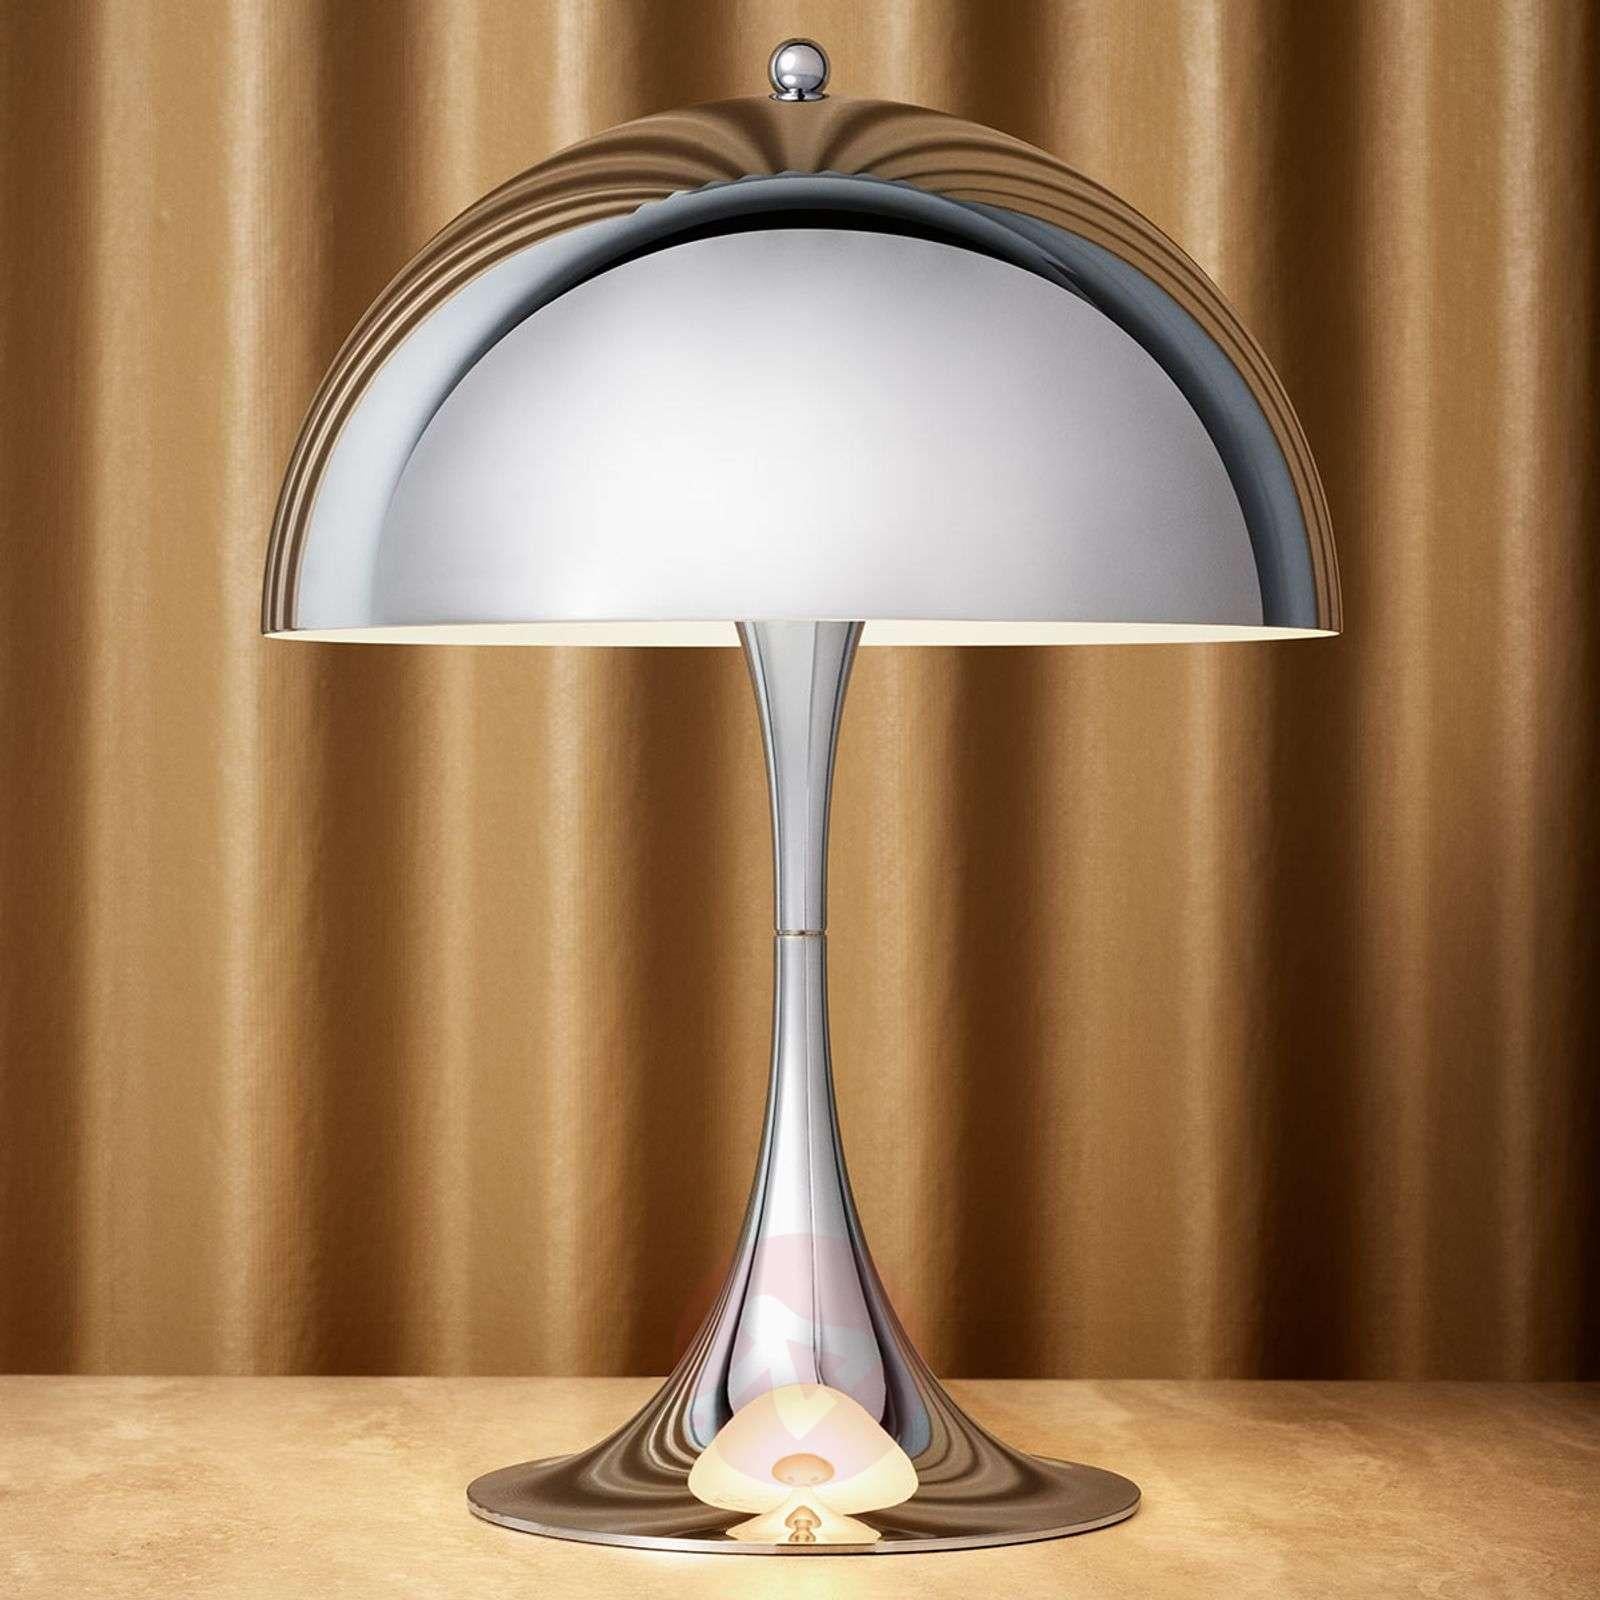 Louis Poulsen, MINI steel table lamp by Verner Panton
Width x Height x Length (mm)
250 x 335 x 250, 1.2 kg
Surface: Bright chrome plated. Material: Shade: Die-stamped steel. Base: Aluminium. Cord length: 2.5 m Switch: On the cord with stepless